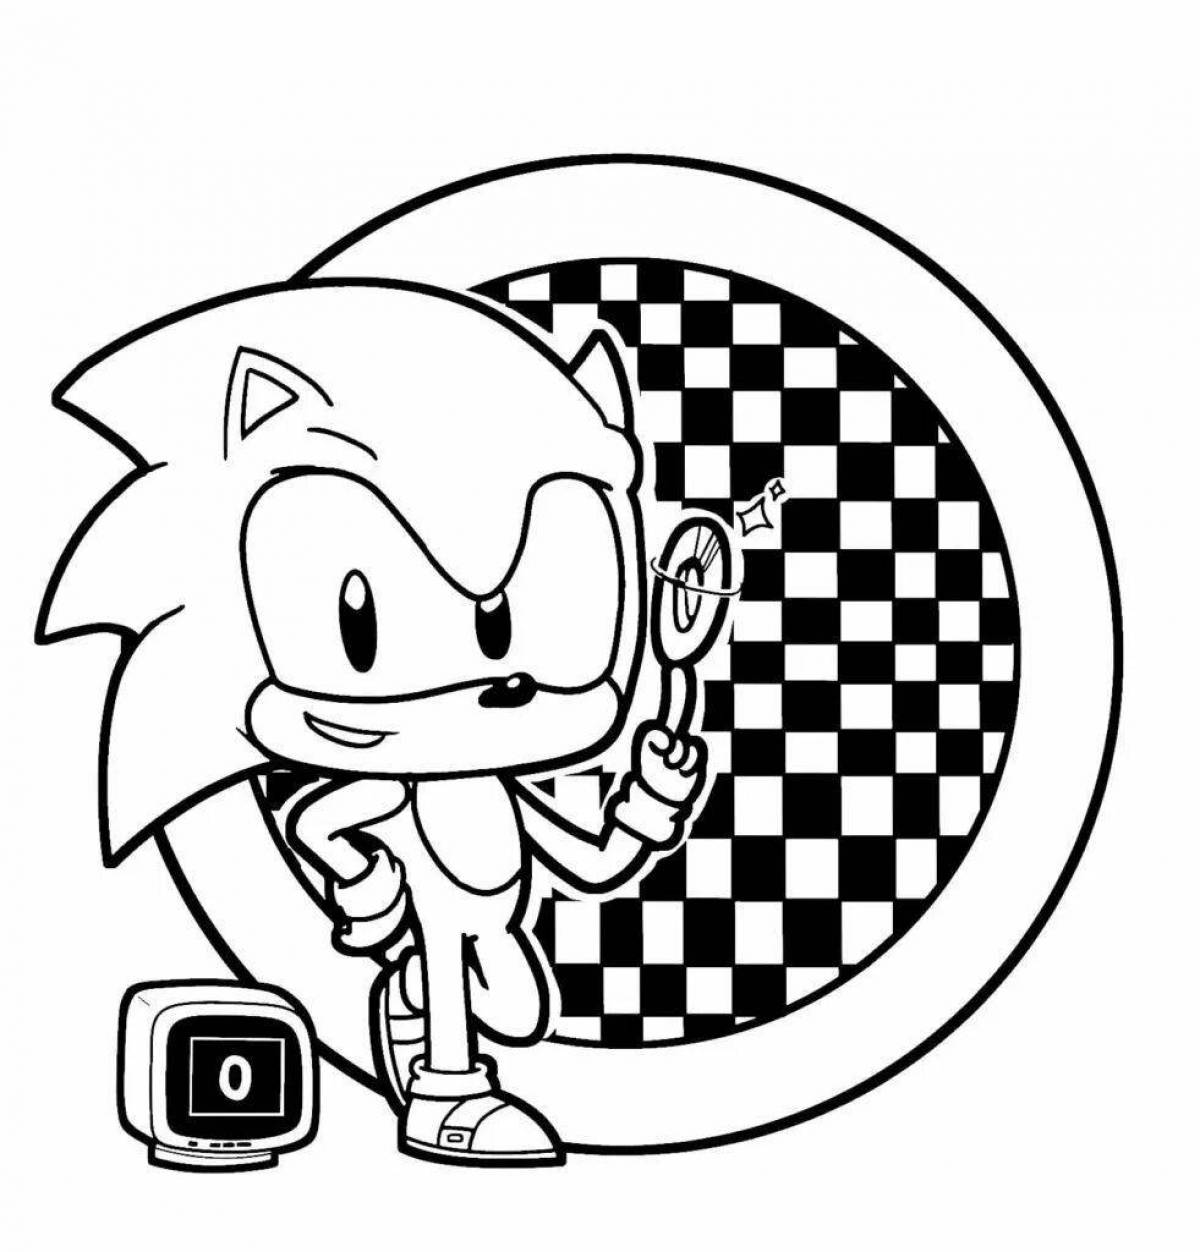 Sonic rainbow awesome coloring book